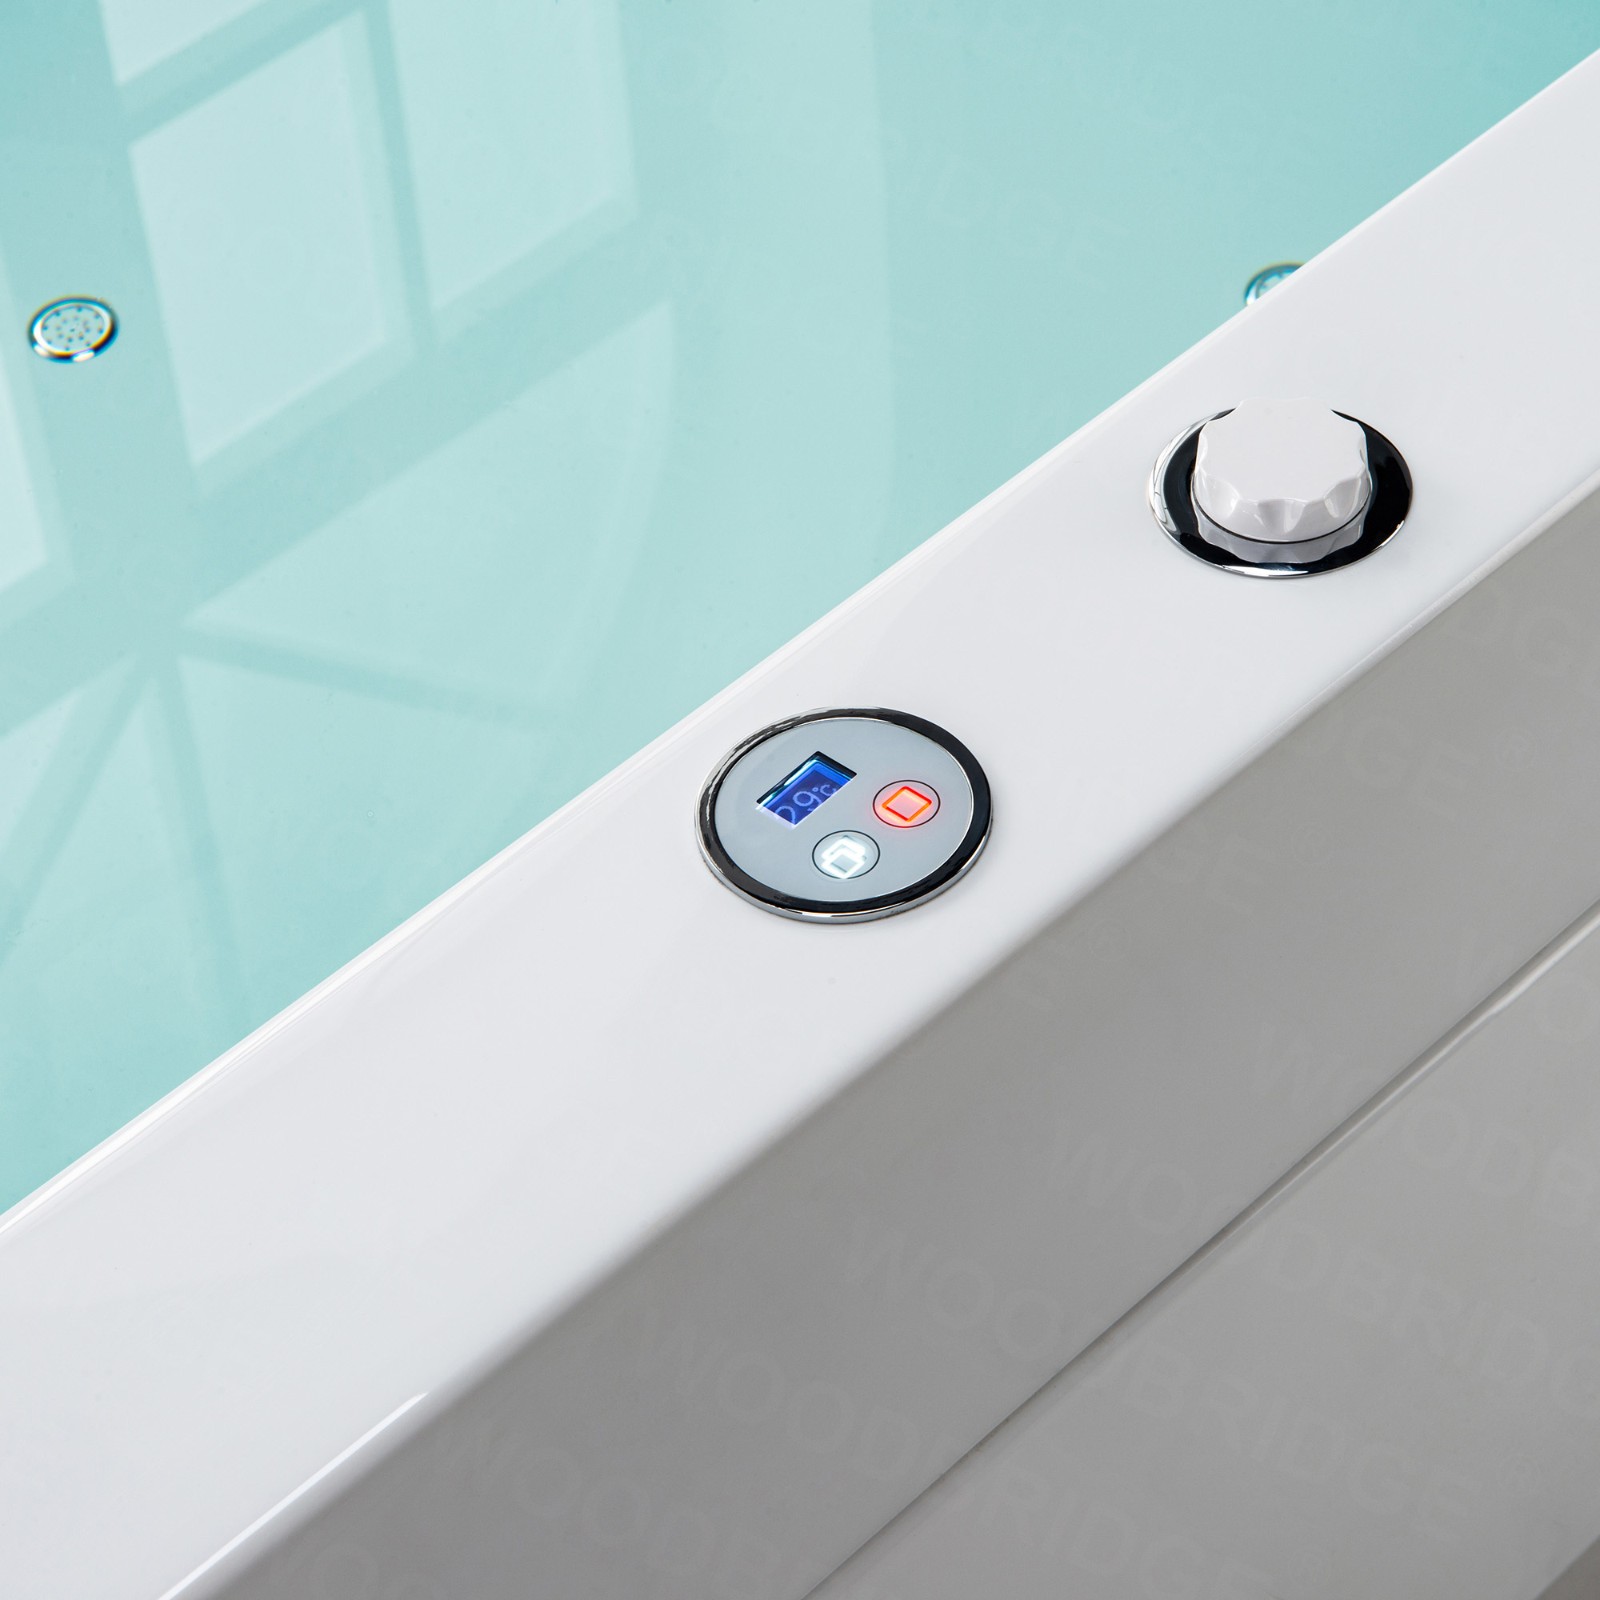  2 Person Freestanding Massage Hydrotherapy Bathtub Tub Hot Tub Spa, with Inline Heater. BTS-0091_9099